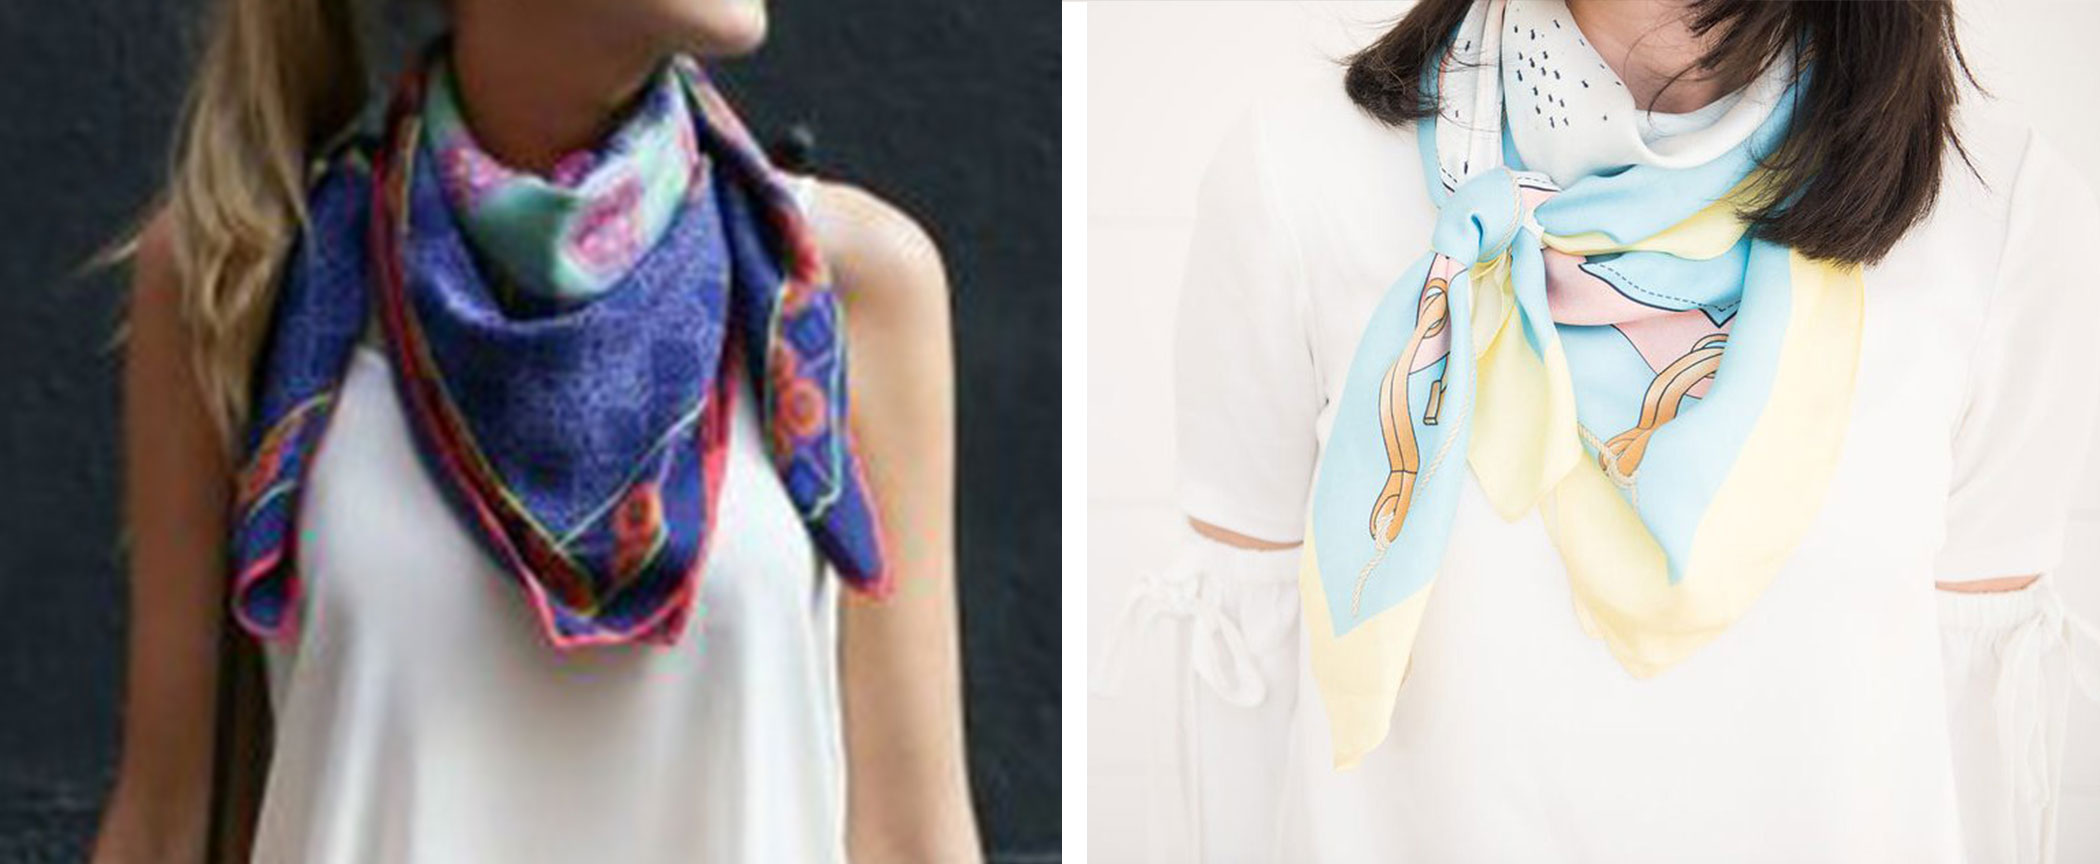 How To: Tie A Square Silk Scarf 5 Ways - ABOUT How To: Tie A